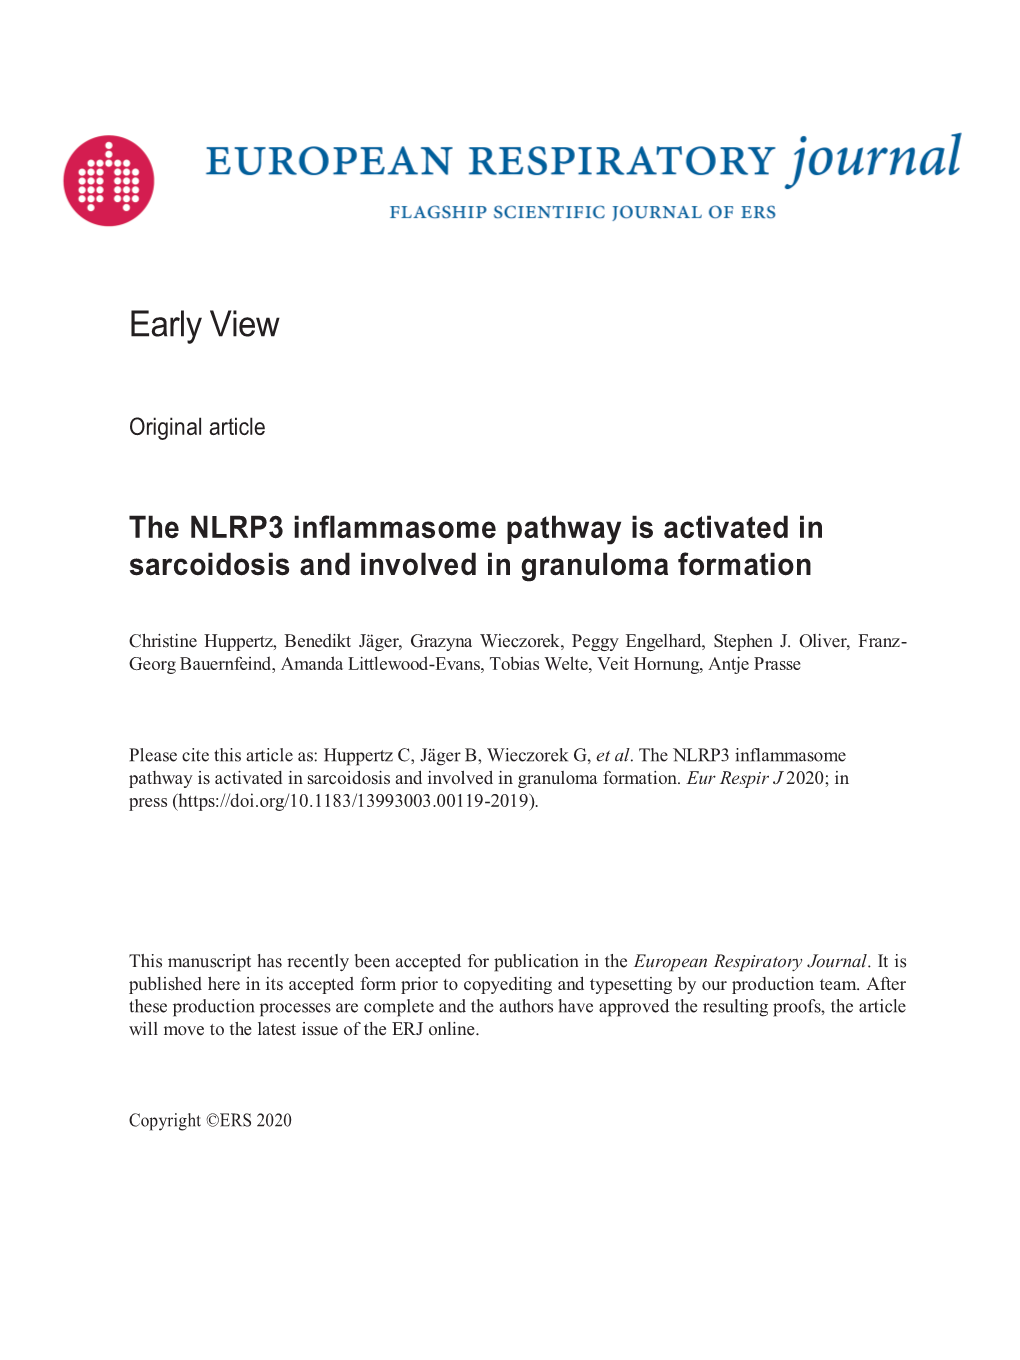 The NLRP3 Inflammasome Pathway Is Activated in Sarcoidosis and Involved in Granuloma Formation